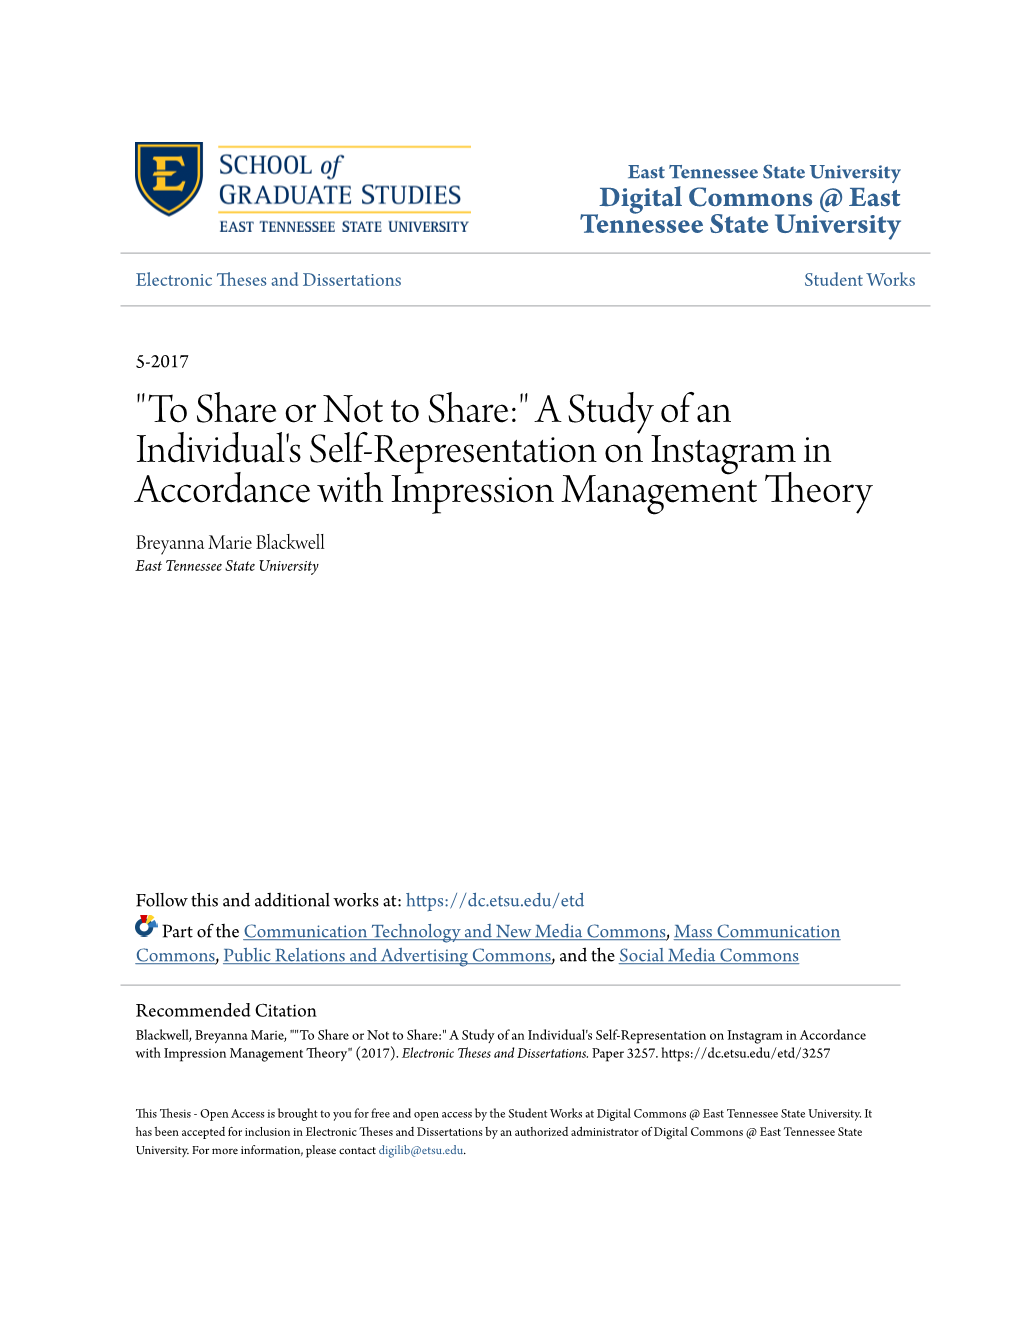 A Study of an Individual's Self-Representation on Instagram in Accordance with Impression Management Theory Breyanna Marie Blackwell East Tennessee State University